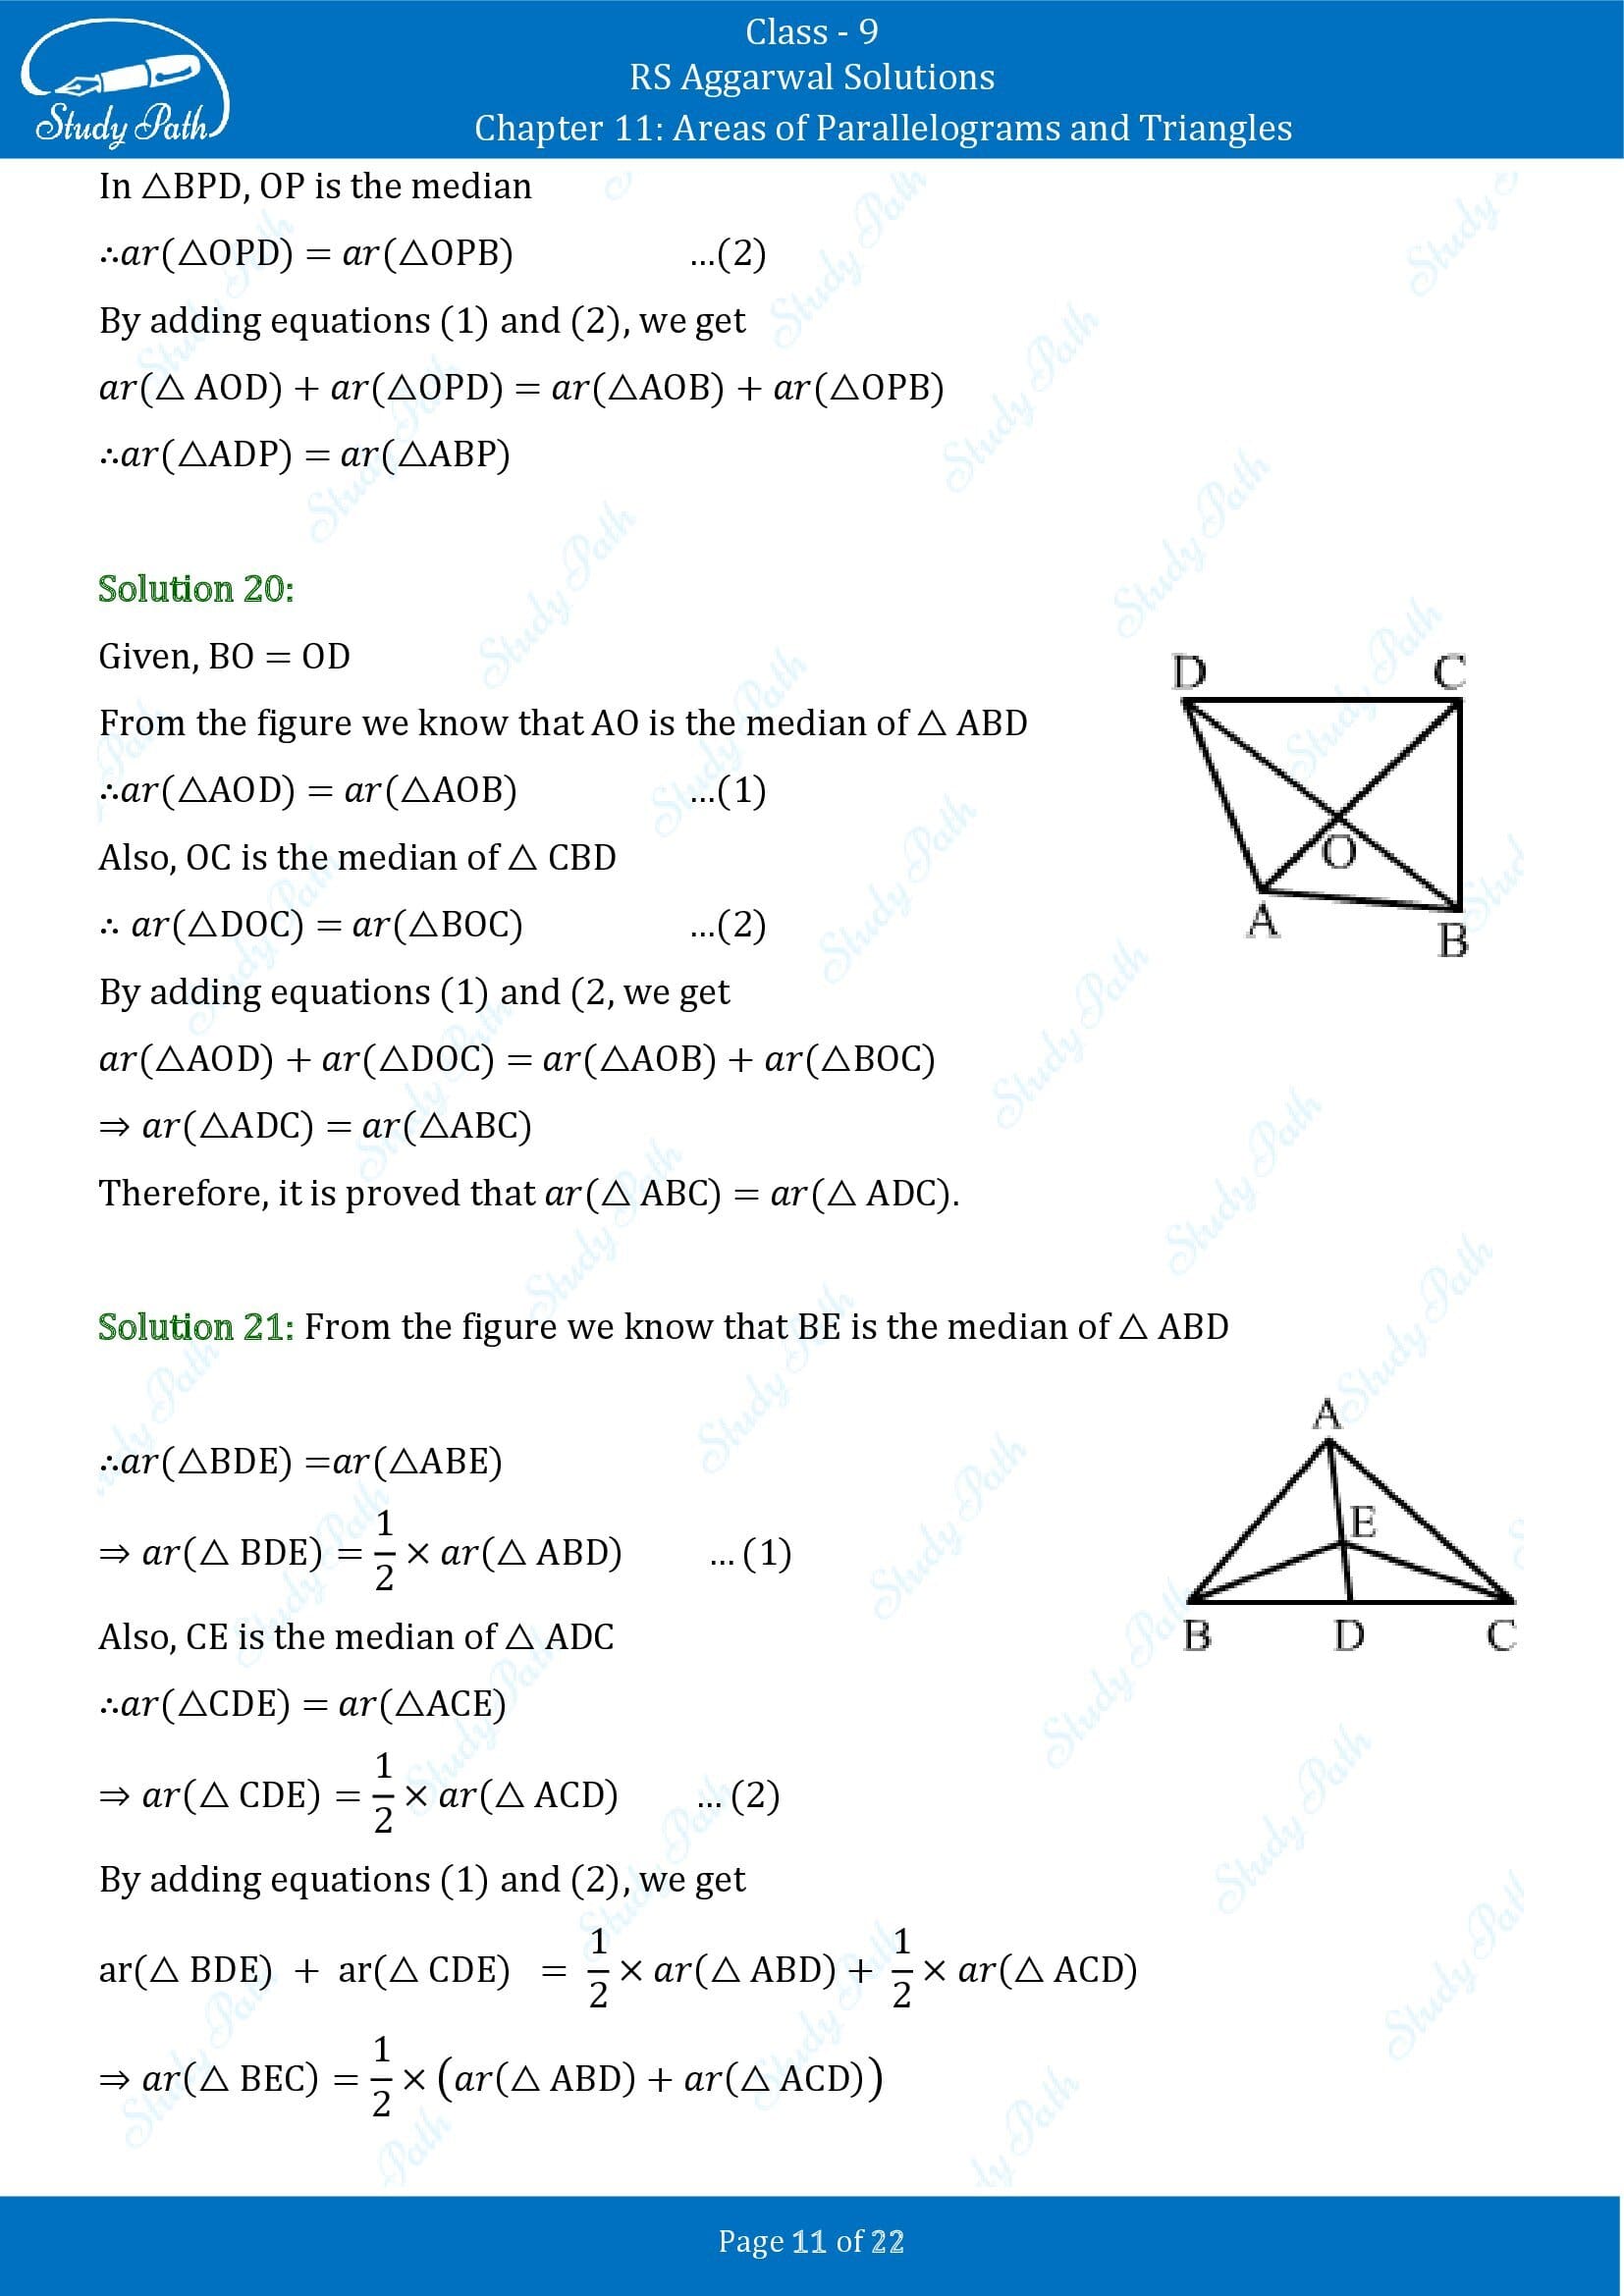 RS Aggarwal Solutions Class 9 Chapter 11 Areas of Parallelograms and Triangles Exercise 11 00011